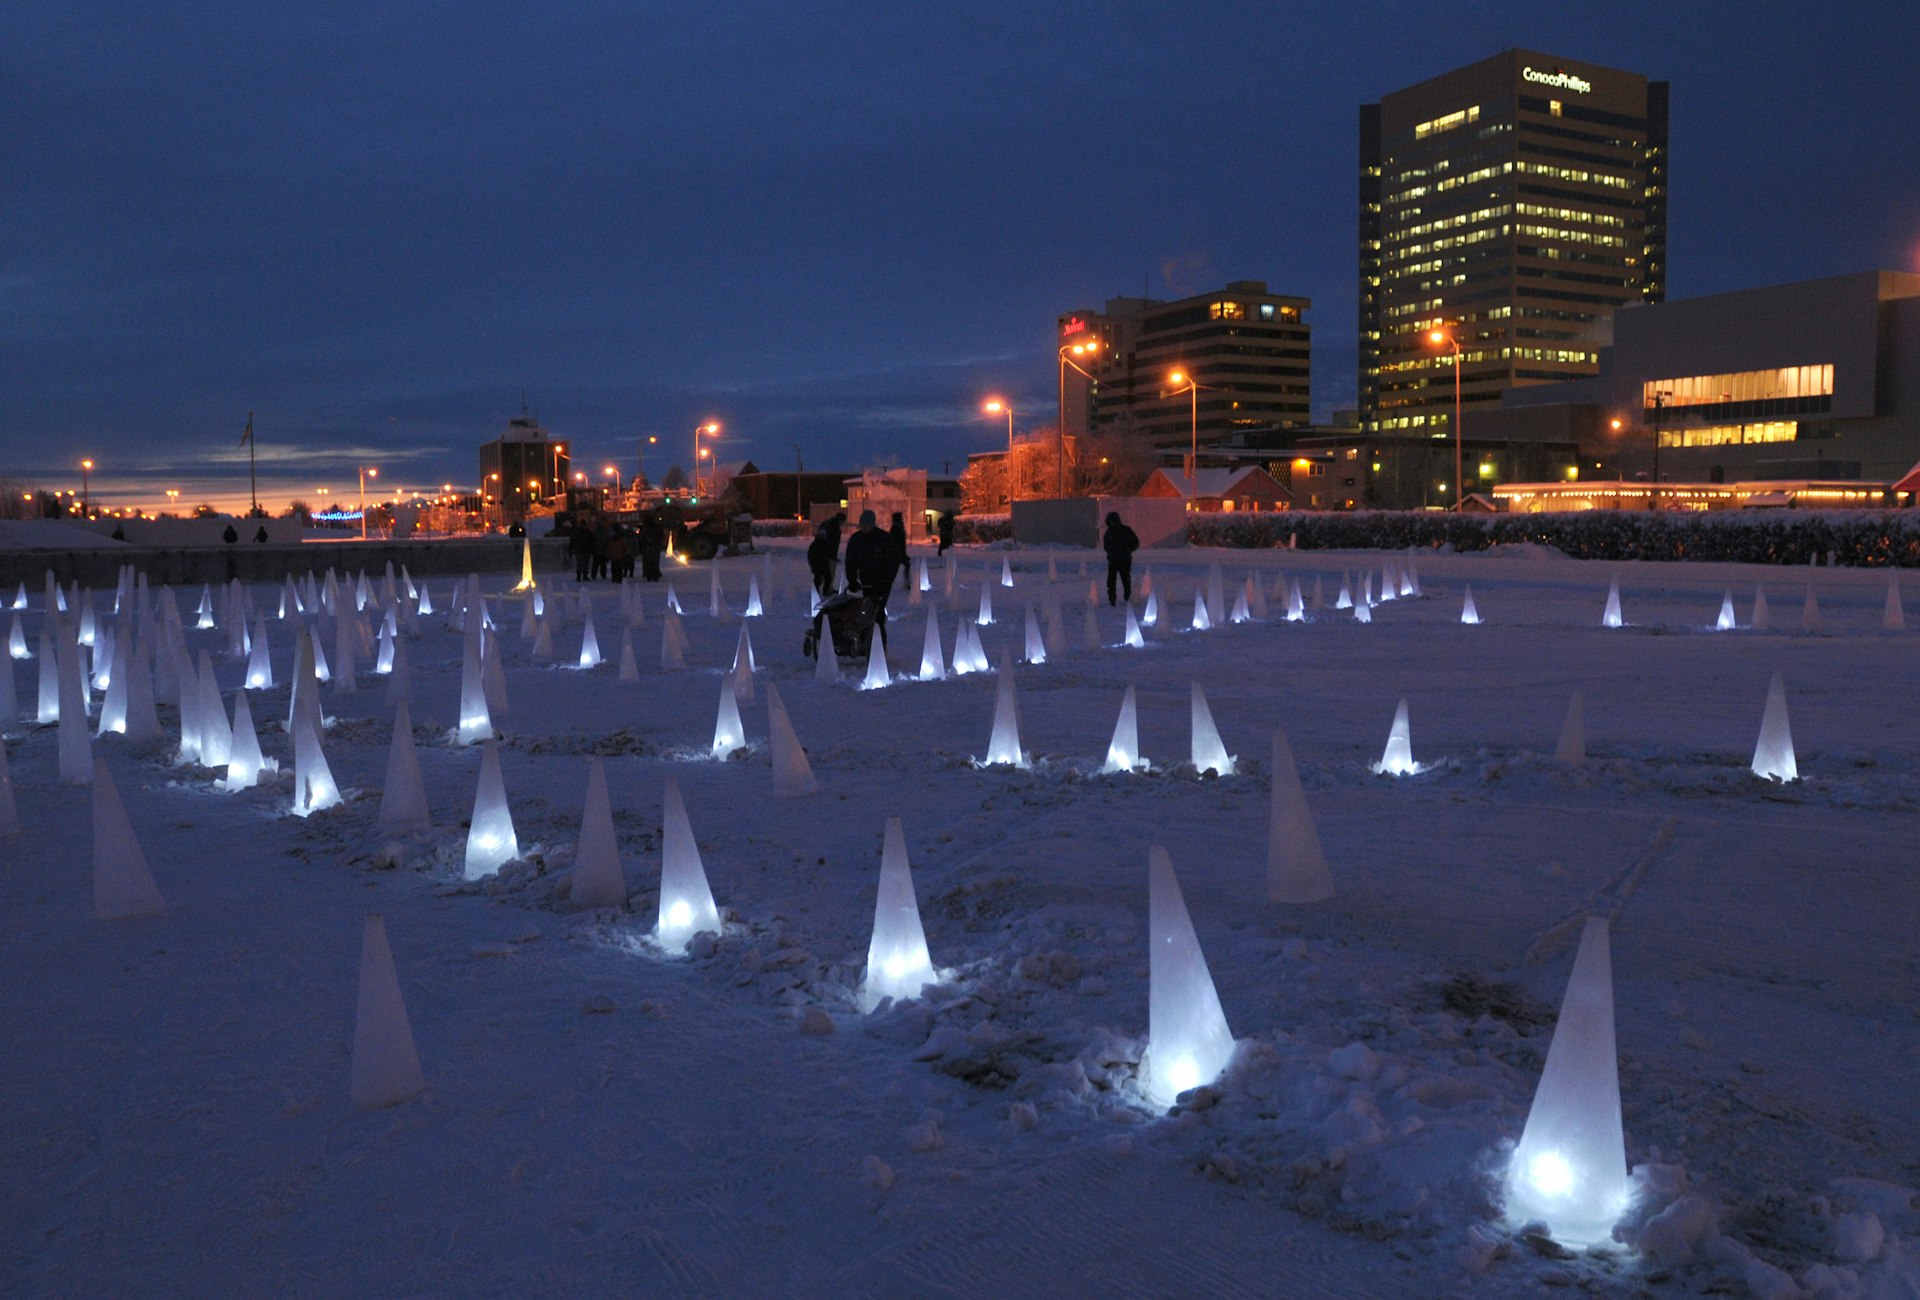 Illuminated ice cones at night on a snowy open area with the Anchorage skyline beyond, part of an art installation called "Ice Fracture"